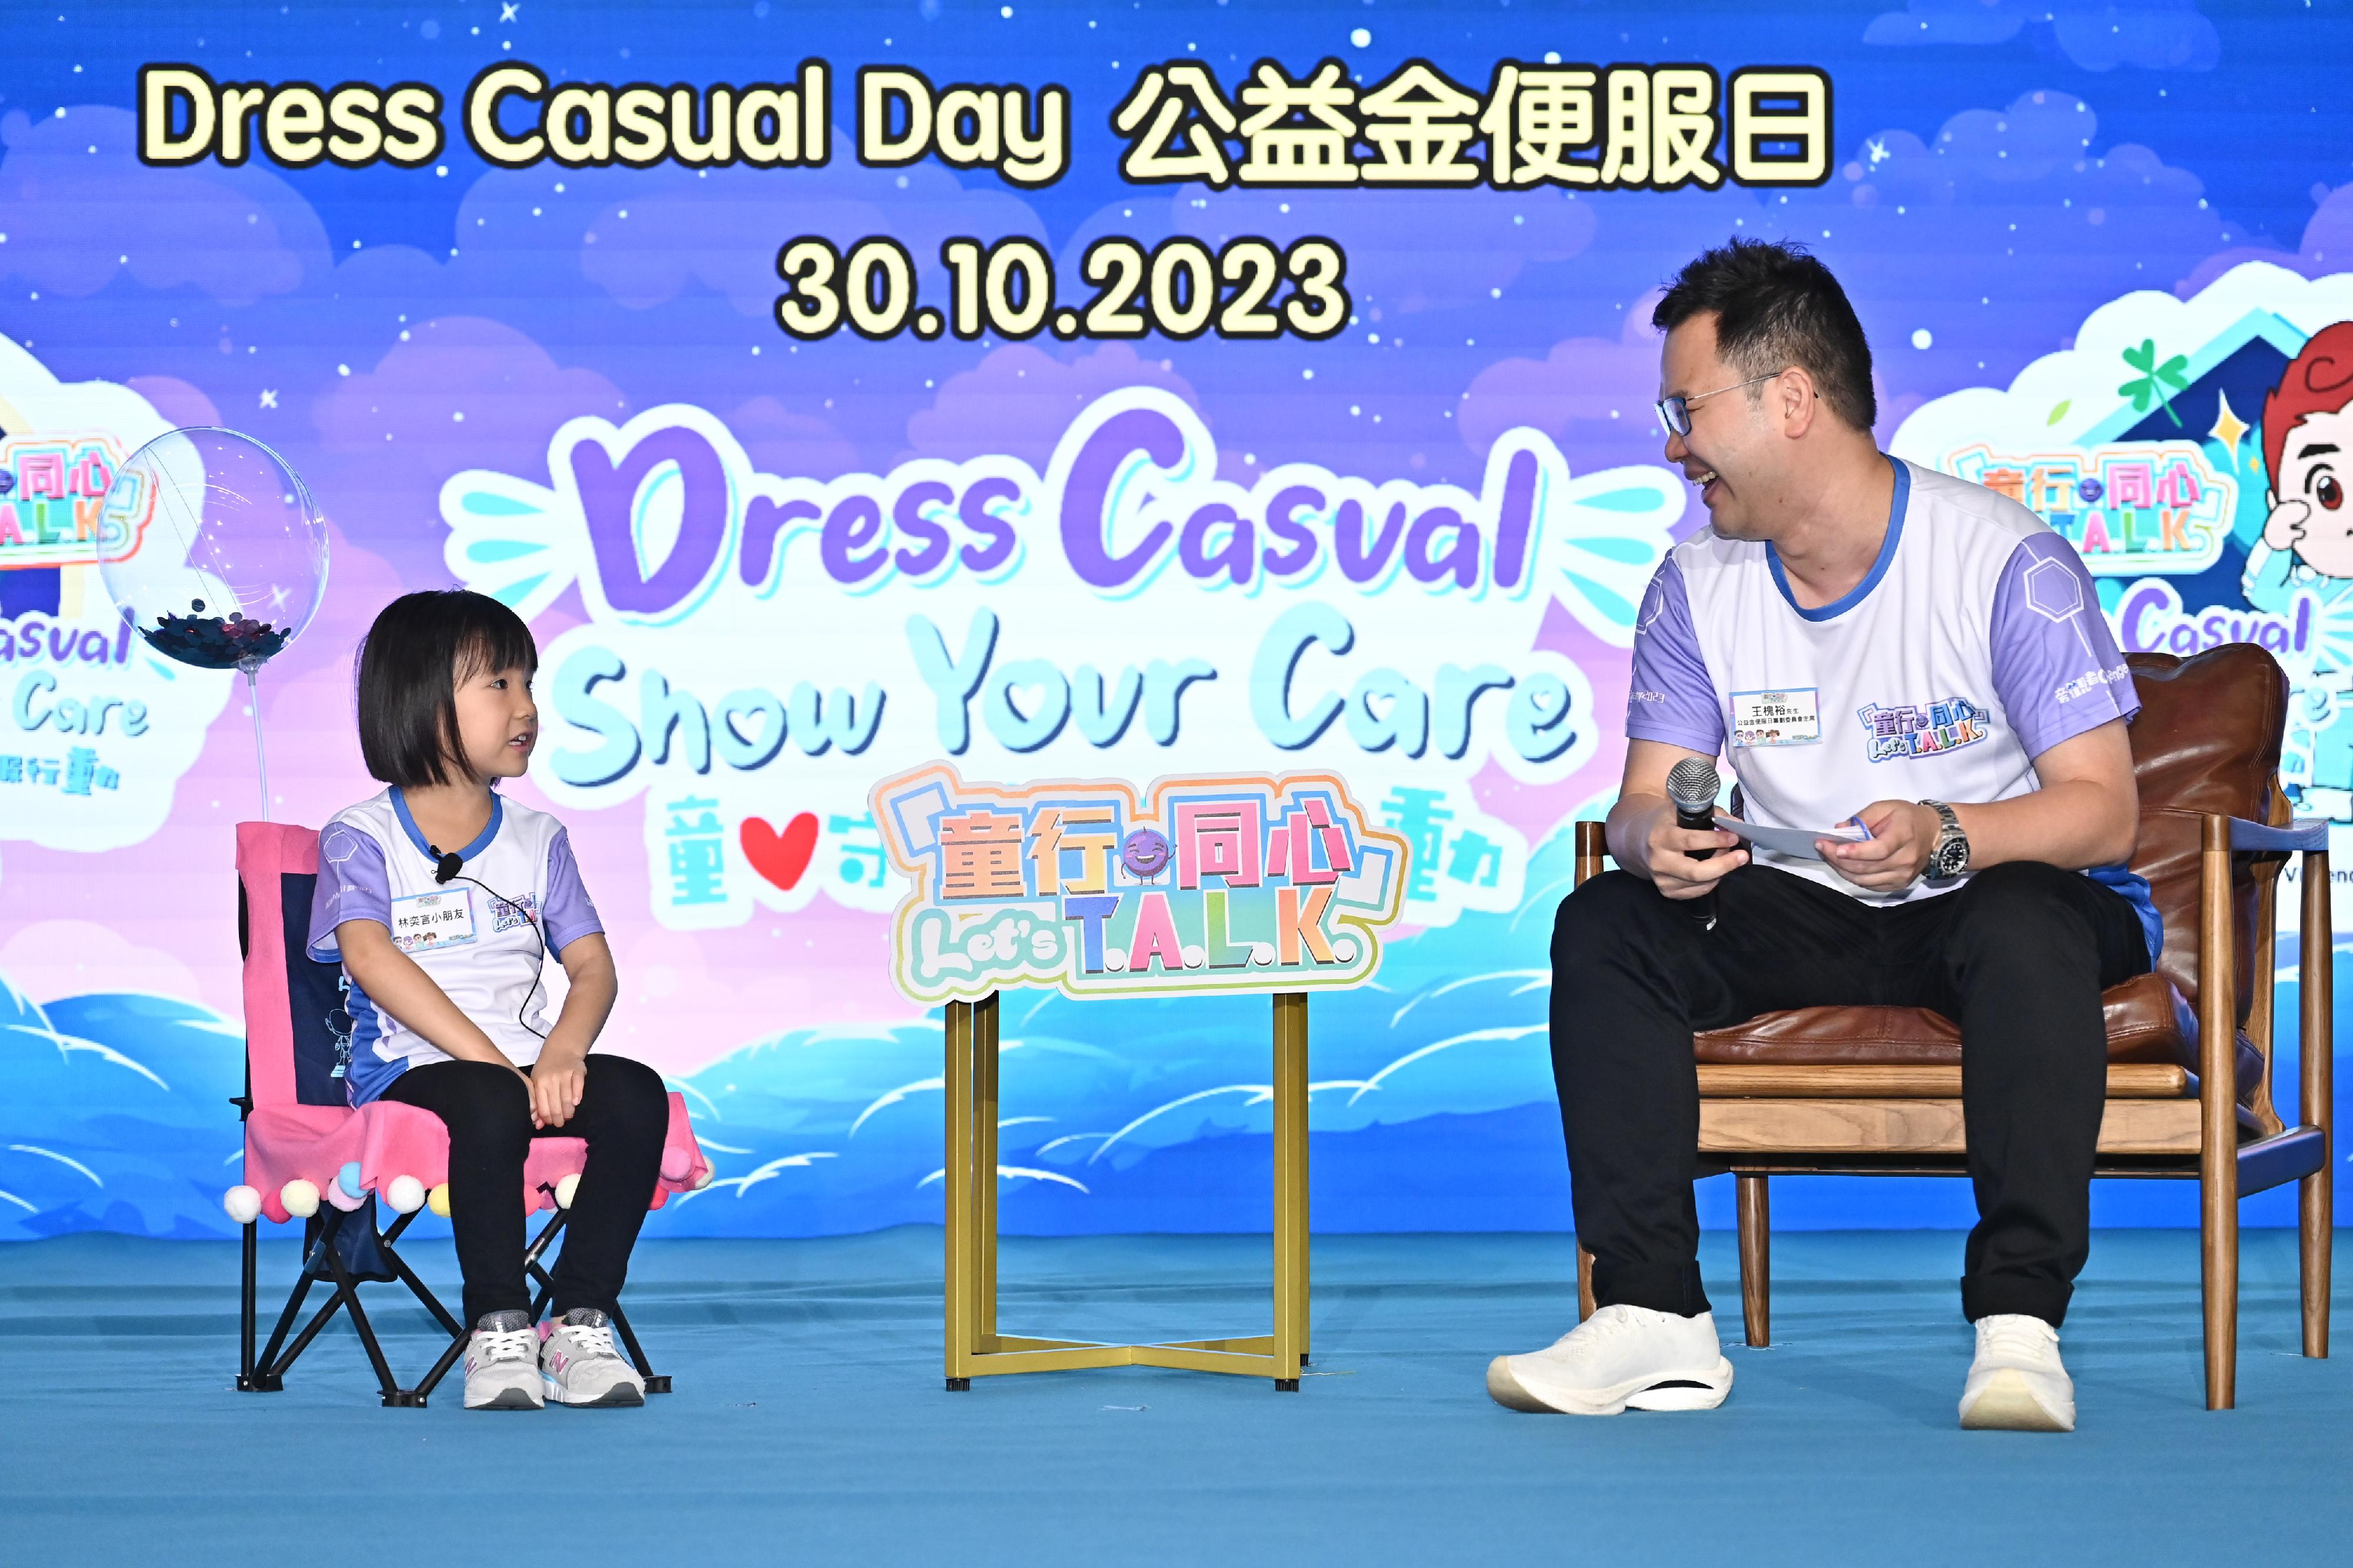 The Police Force held the opening ceremony of "Let's T.A.L.K. - Child Protection Campaign 2023" today (September 23). Photo shows the Chairman of the Dress Casual Day Organising Committee of the Community Chest, Mr Wong Wai-yue (right), chatting with a child representative to introduce Community Chest Causal Wear Day 2023 with the theme of “Child Protection”.